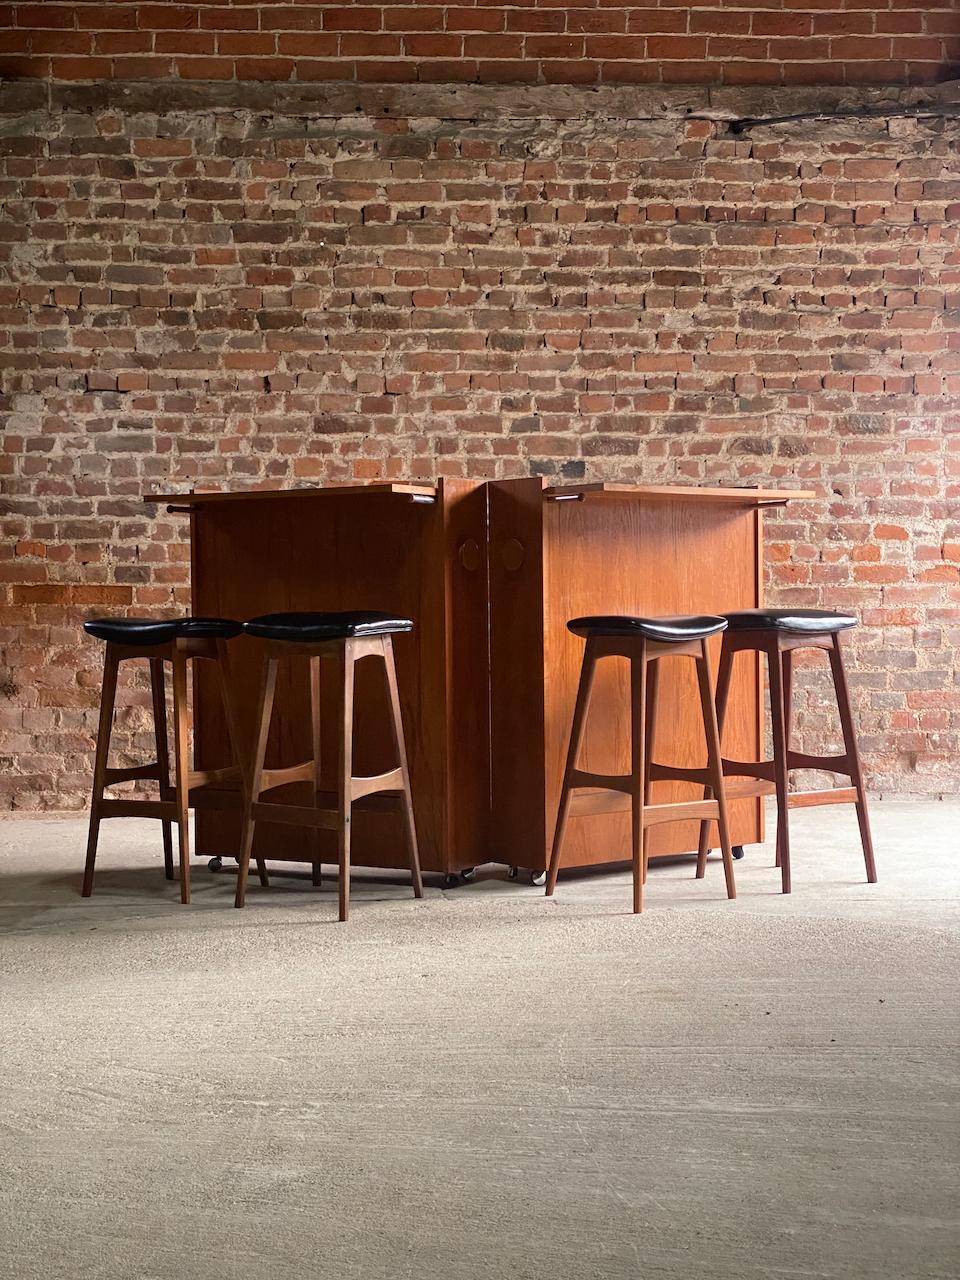 Erik buch drinks bar and barstools by Johannes Andersen, Circa 1960.

Fabulous 1960's mid-century Danish drinks bar also known as the ‘Bar in a Box’ designed by Erik Buch for Dyrlund matched with four solid teak barstools by Johannes Andersen and